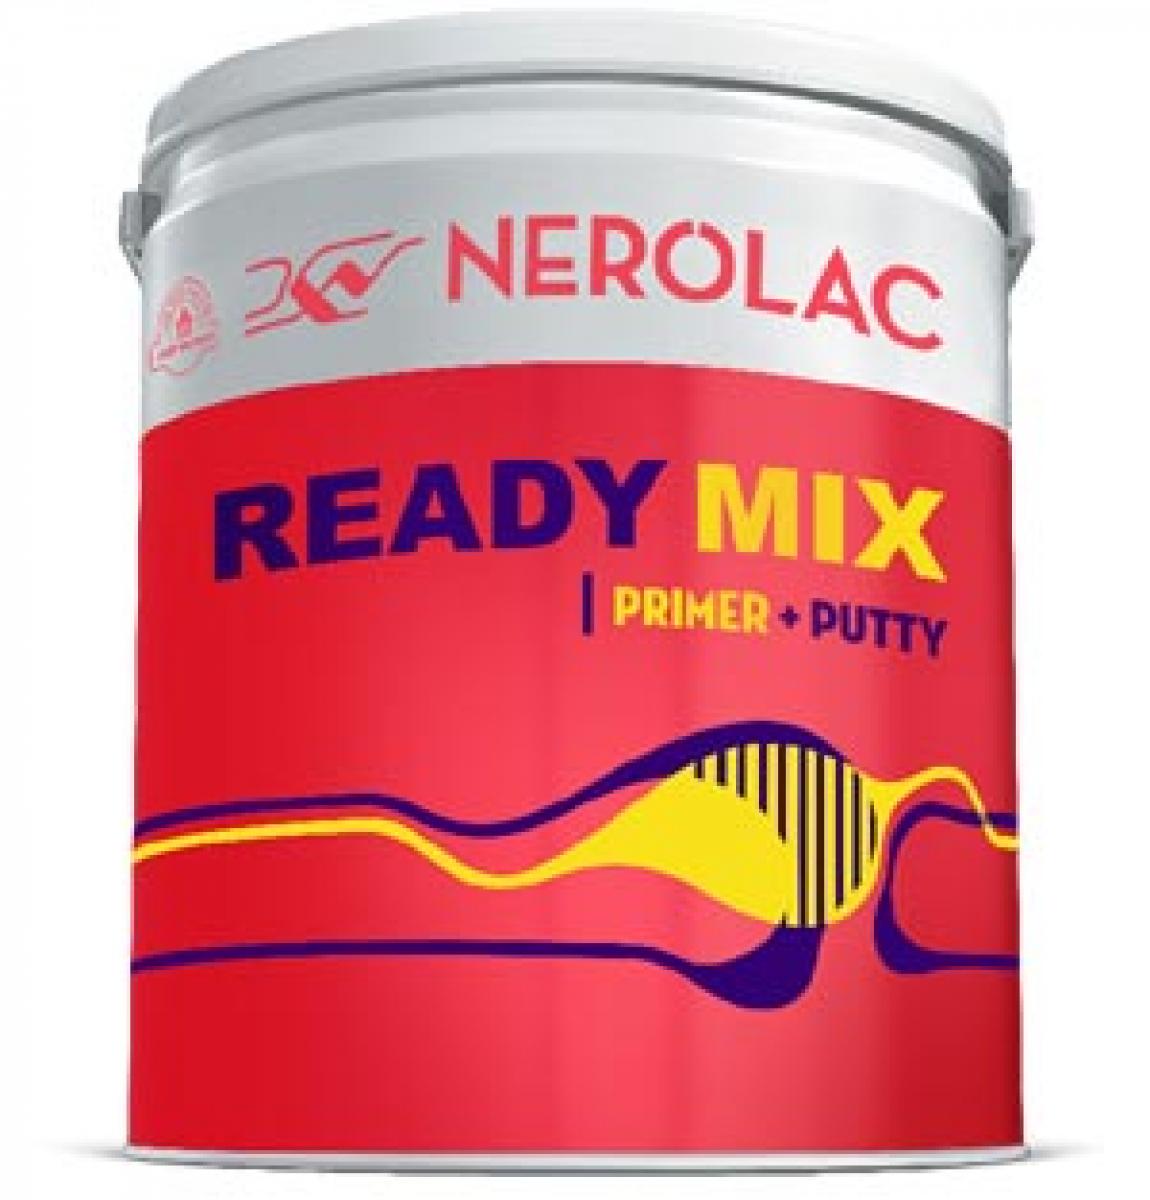 Kansai Nerolac eases painting with Ready mix primer + putty 